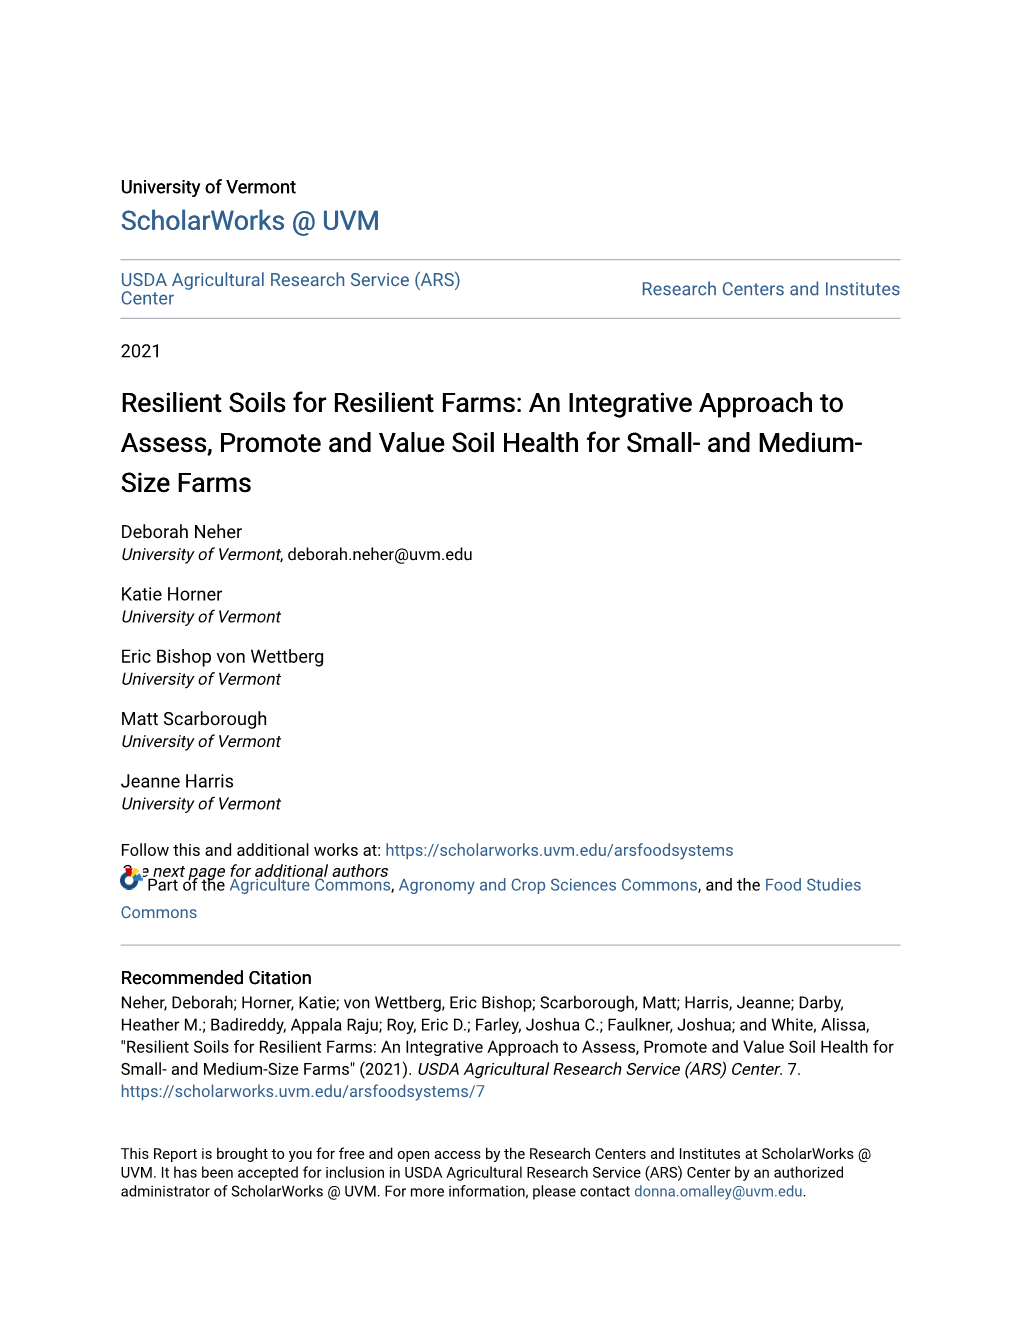 Resilient Soils for Resilient Farms: an Integrative Approach to Assess, Promote and Value Soil Health for Small- and Medium- Size Farms